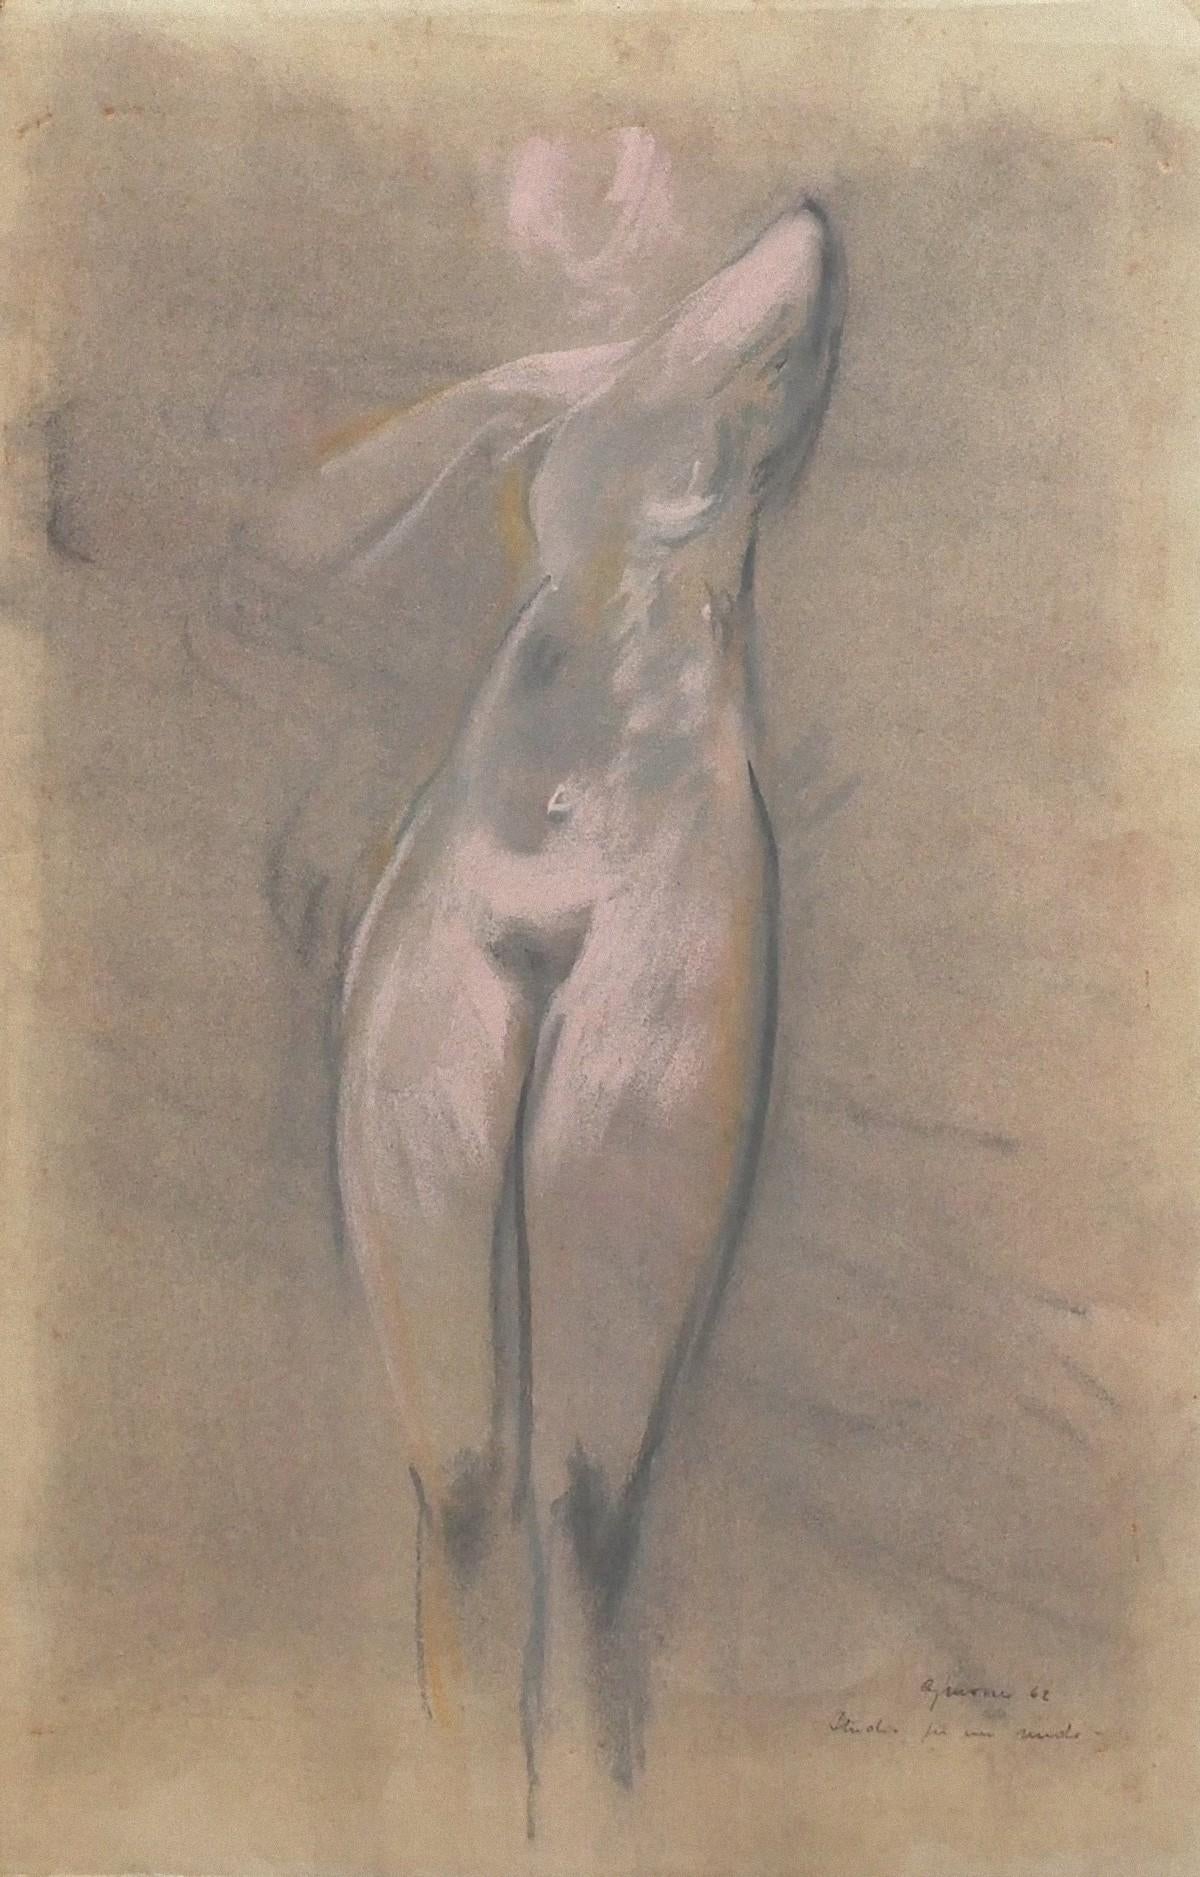 Nude - Original Pastel Drawing Signed "Airone" - 1962